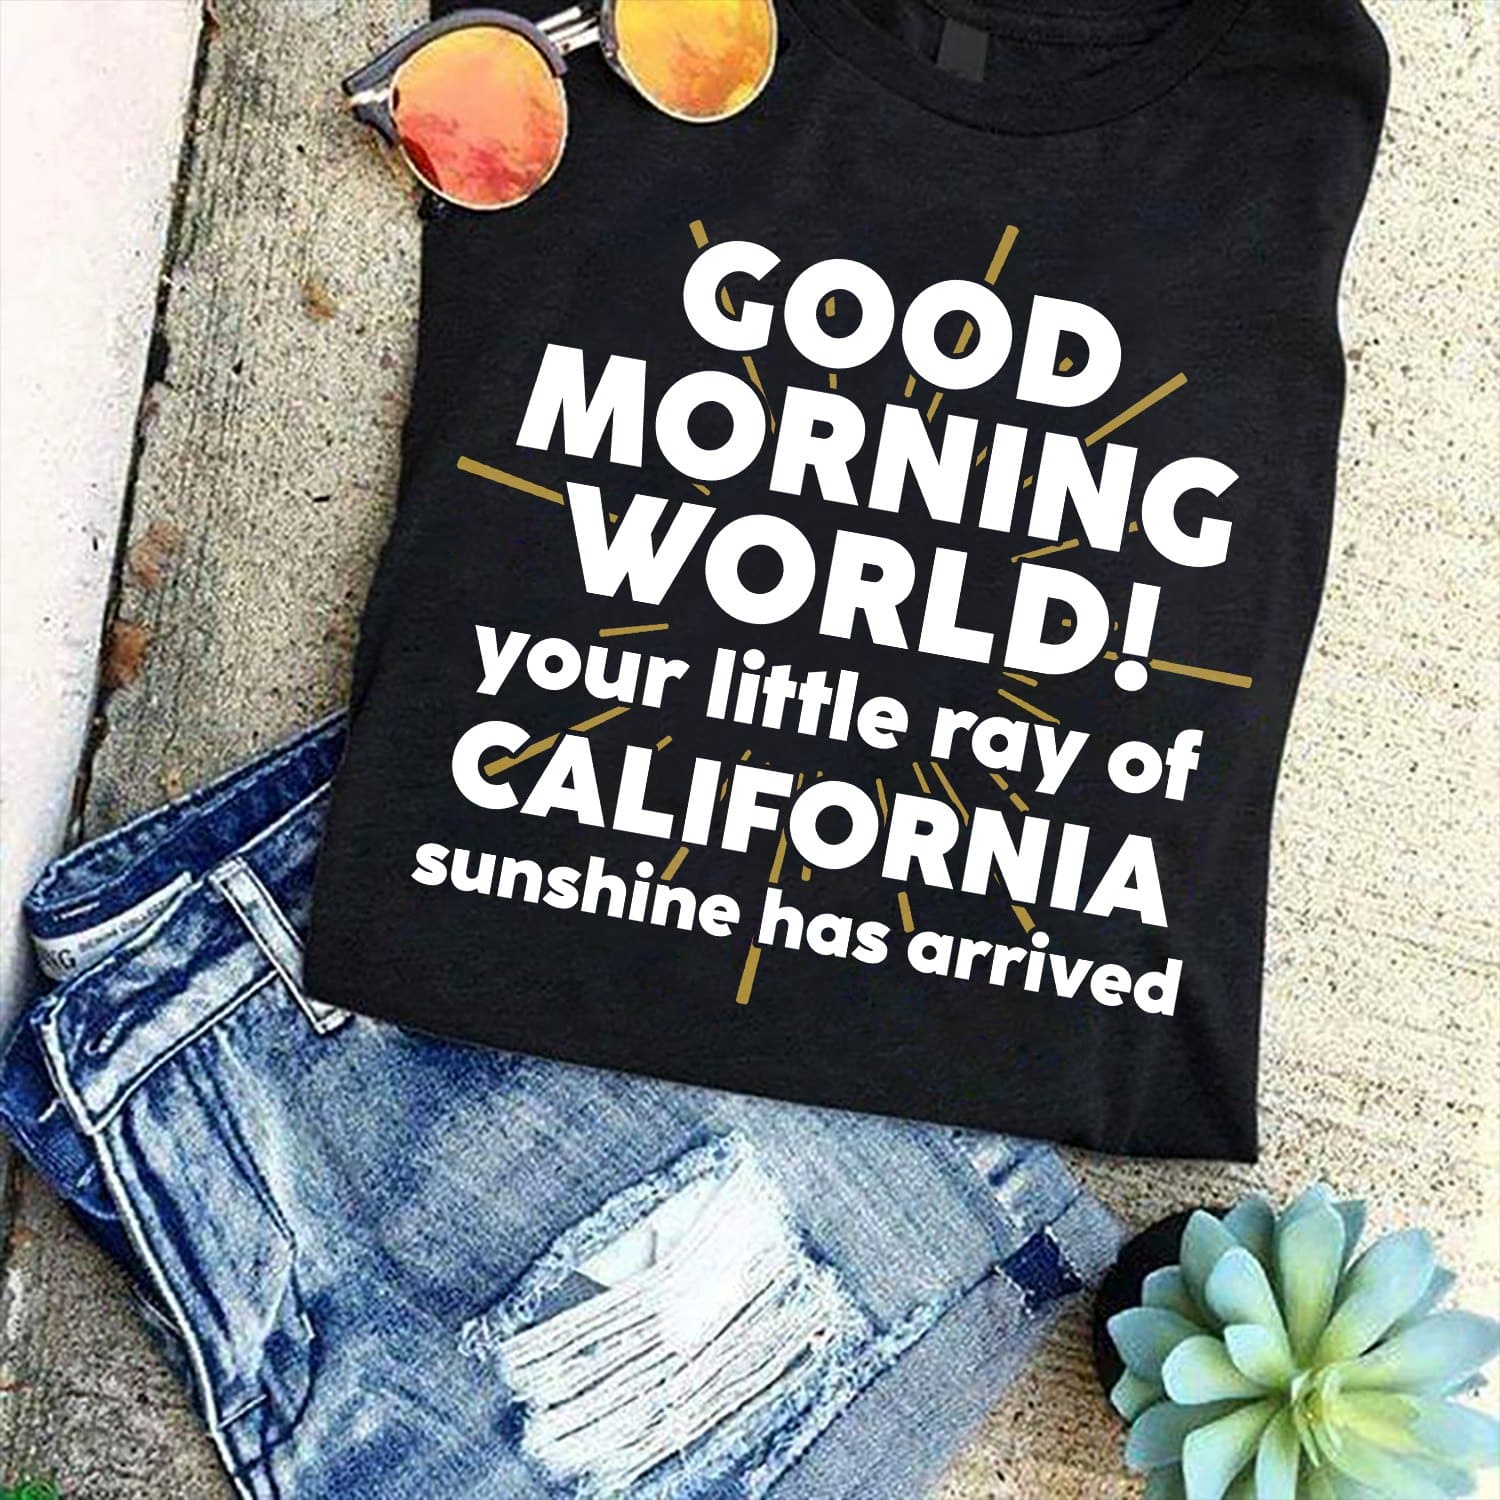 Good morning worl your little ray of California sunshine has arrived - T-shirt for Californian